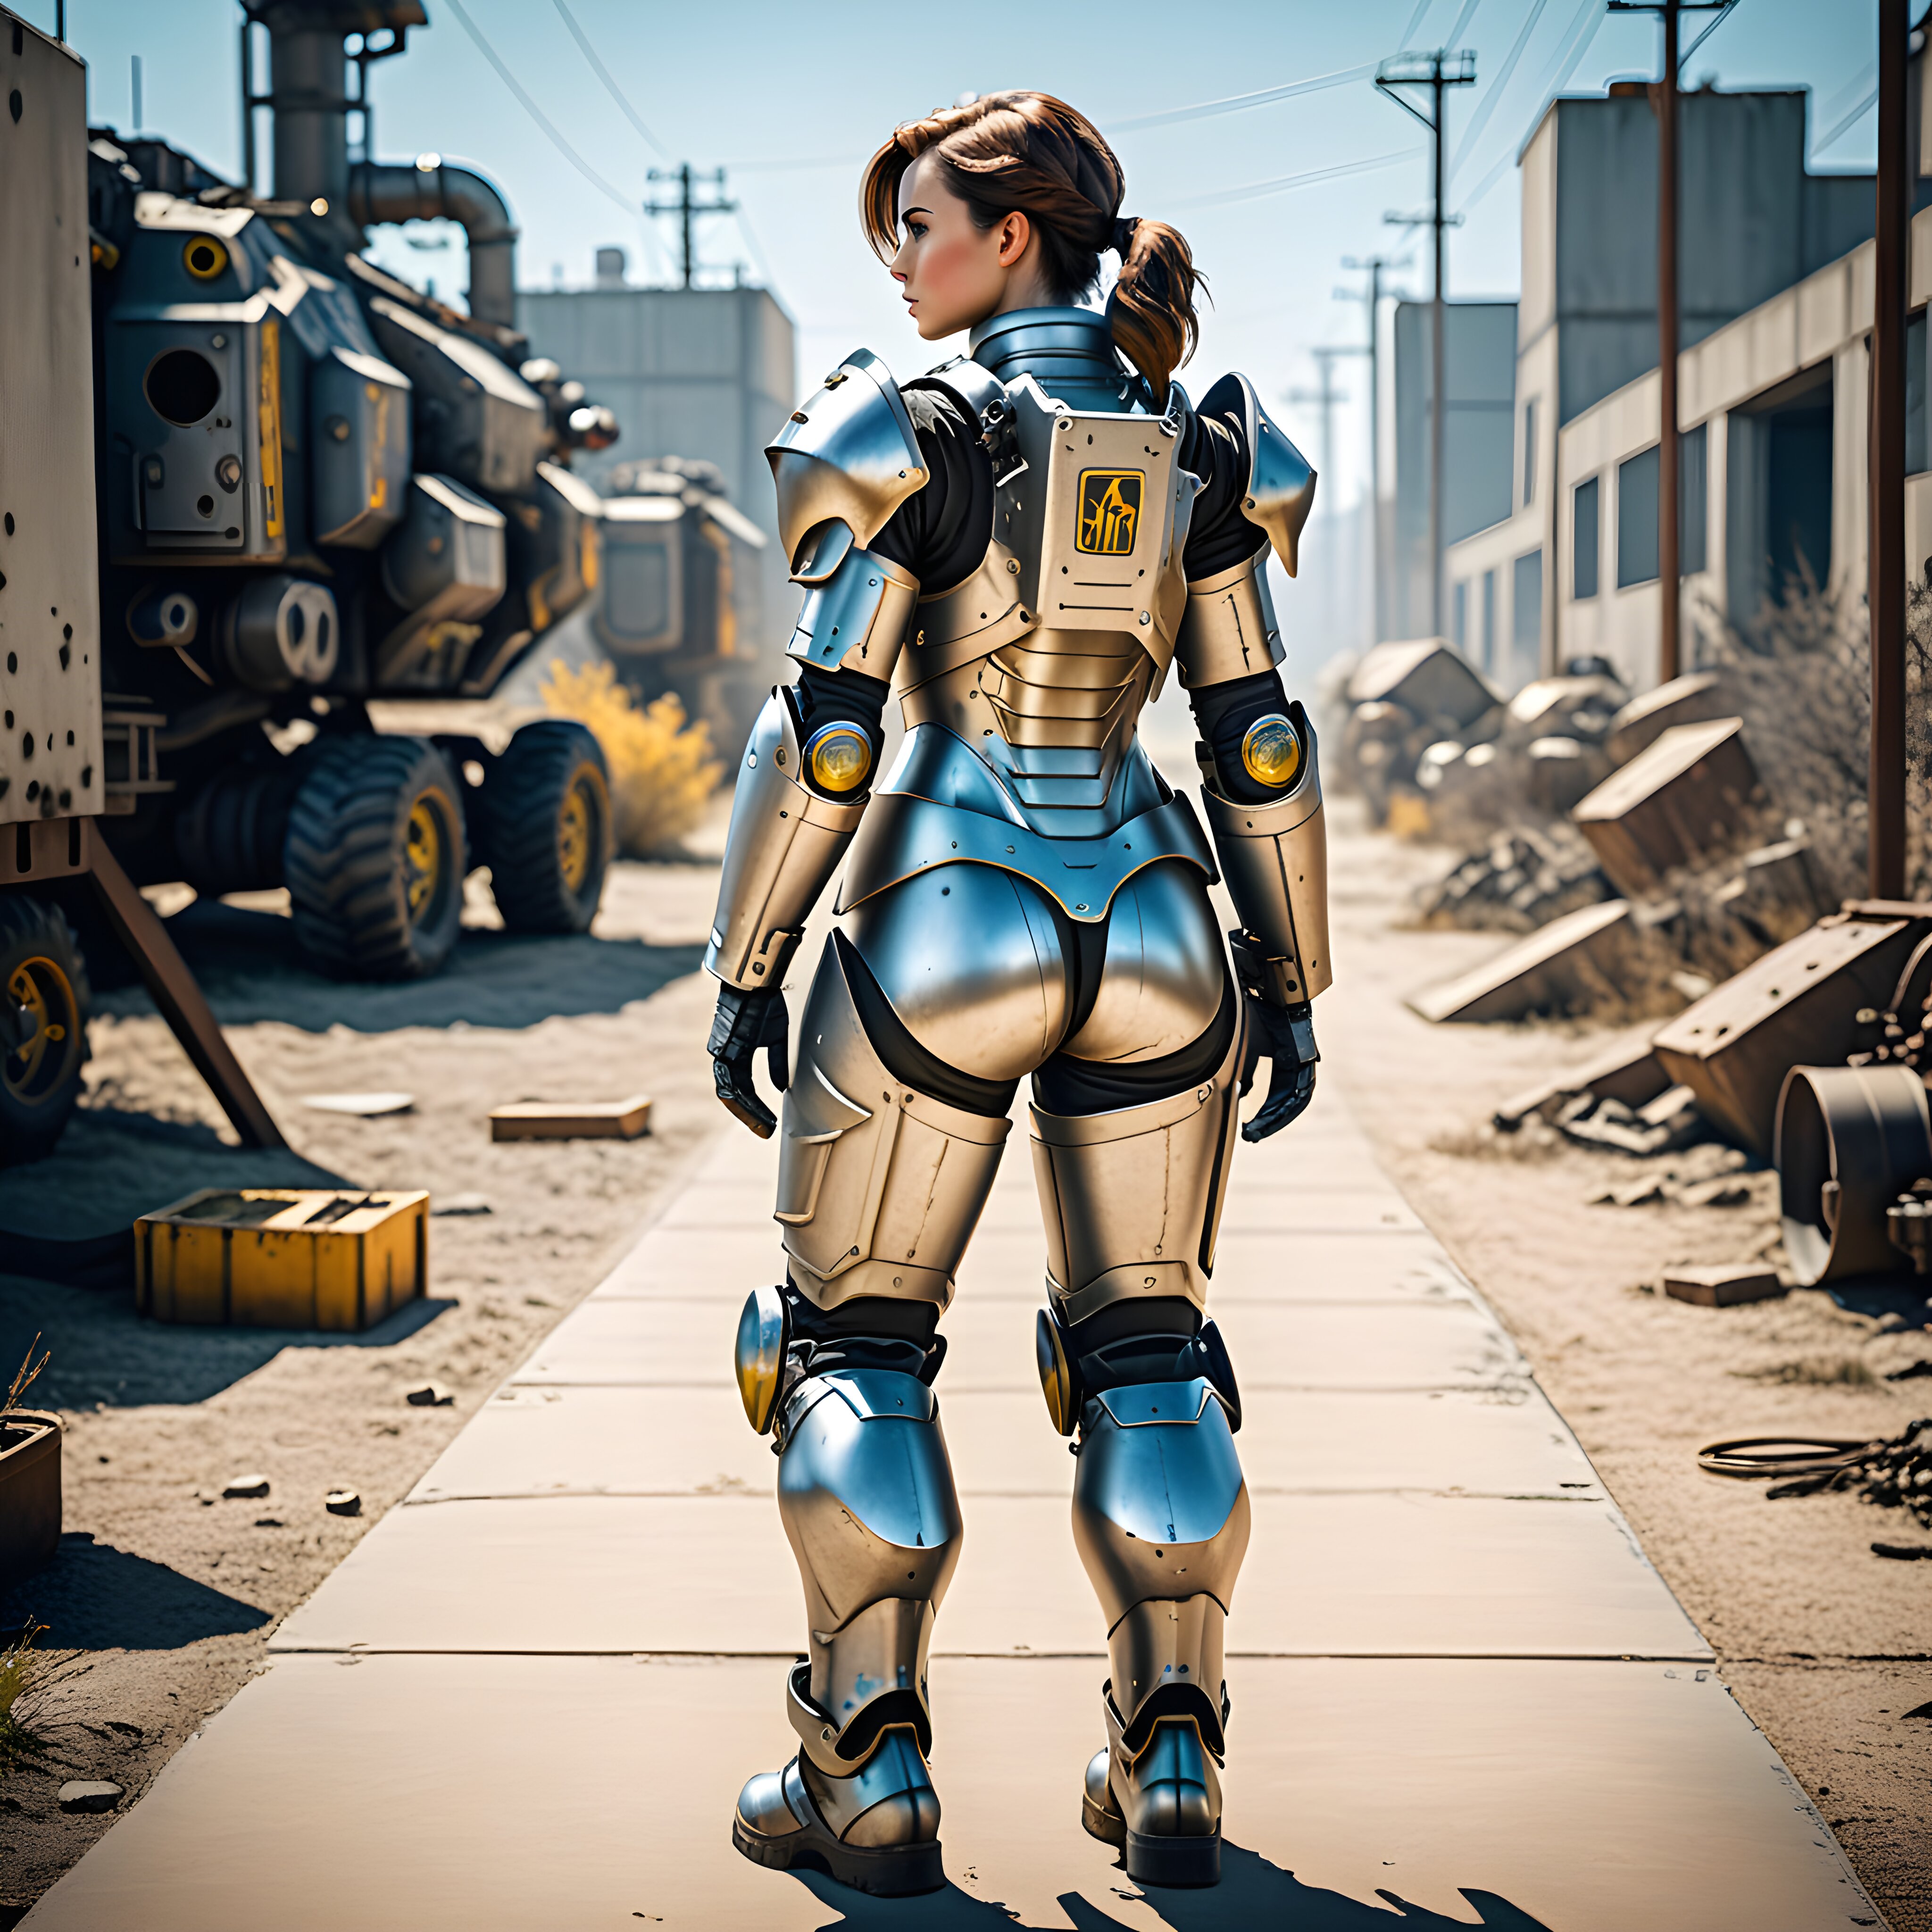 Free photo The girl in the power armor